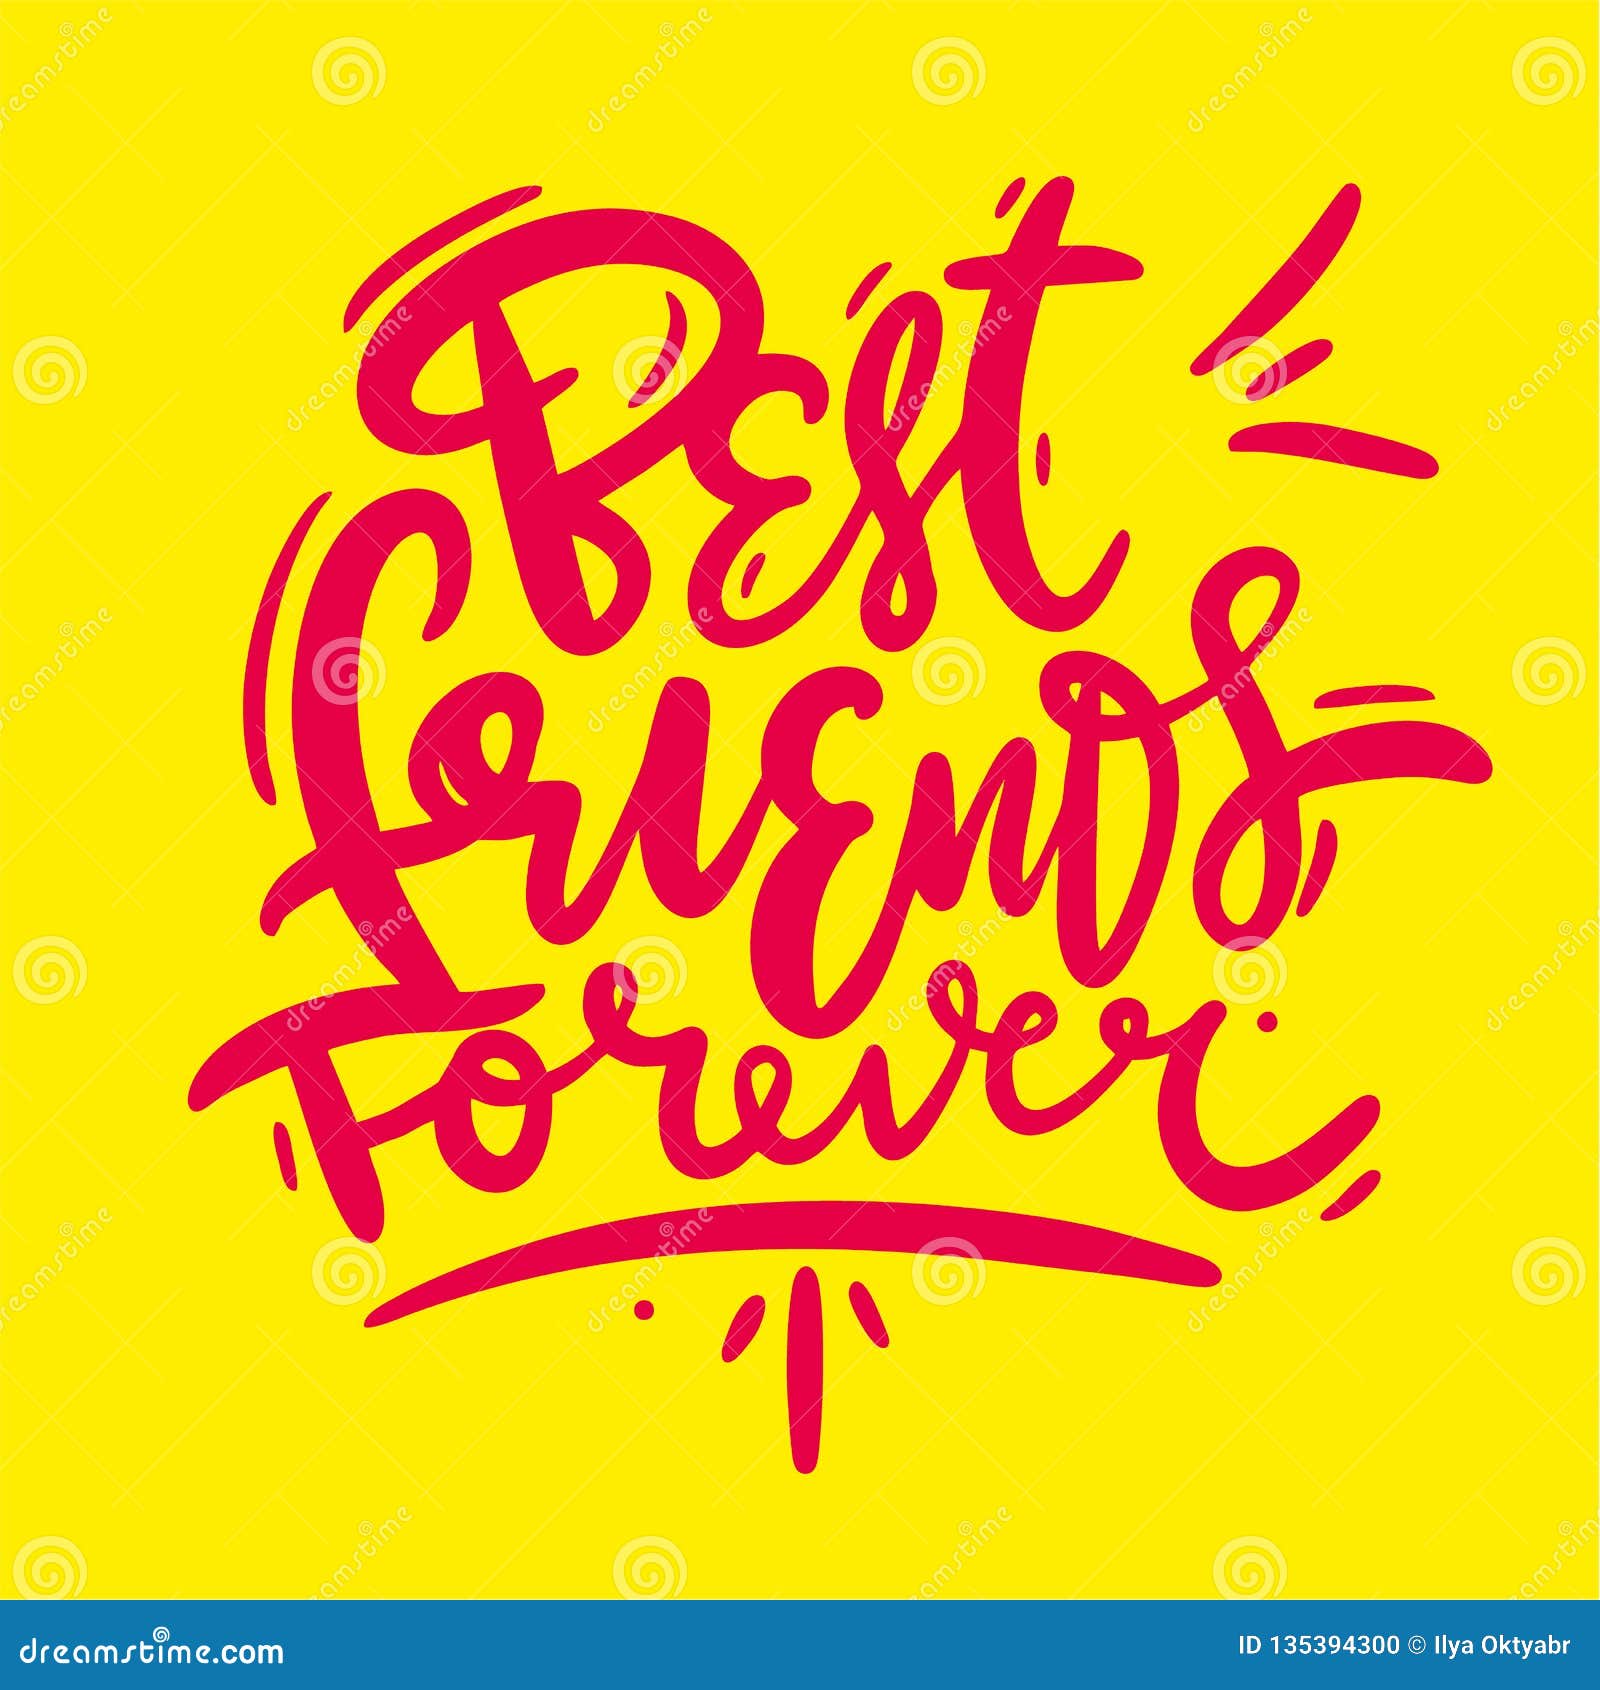 Best Friends Forever. Hand Drawn Vector Lettering Isolated on Yellow  Background Stock Illustration - Illustration of happiness, poster: 135394300